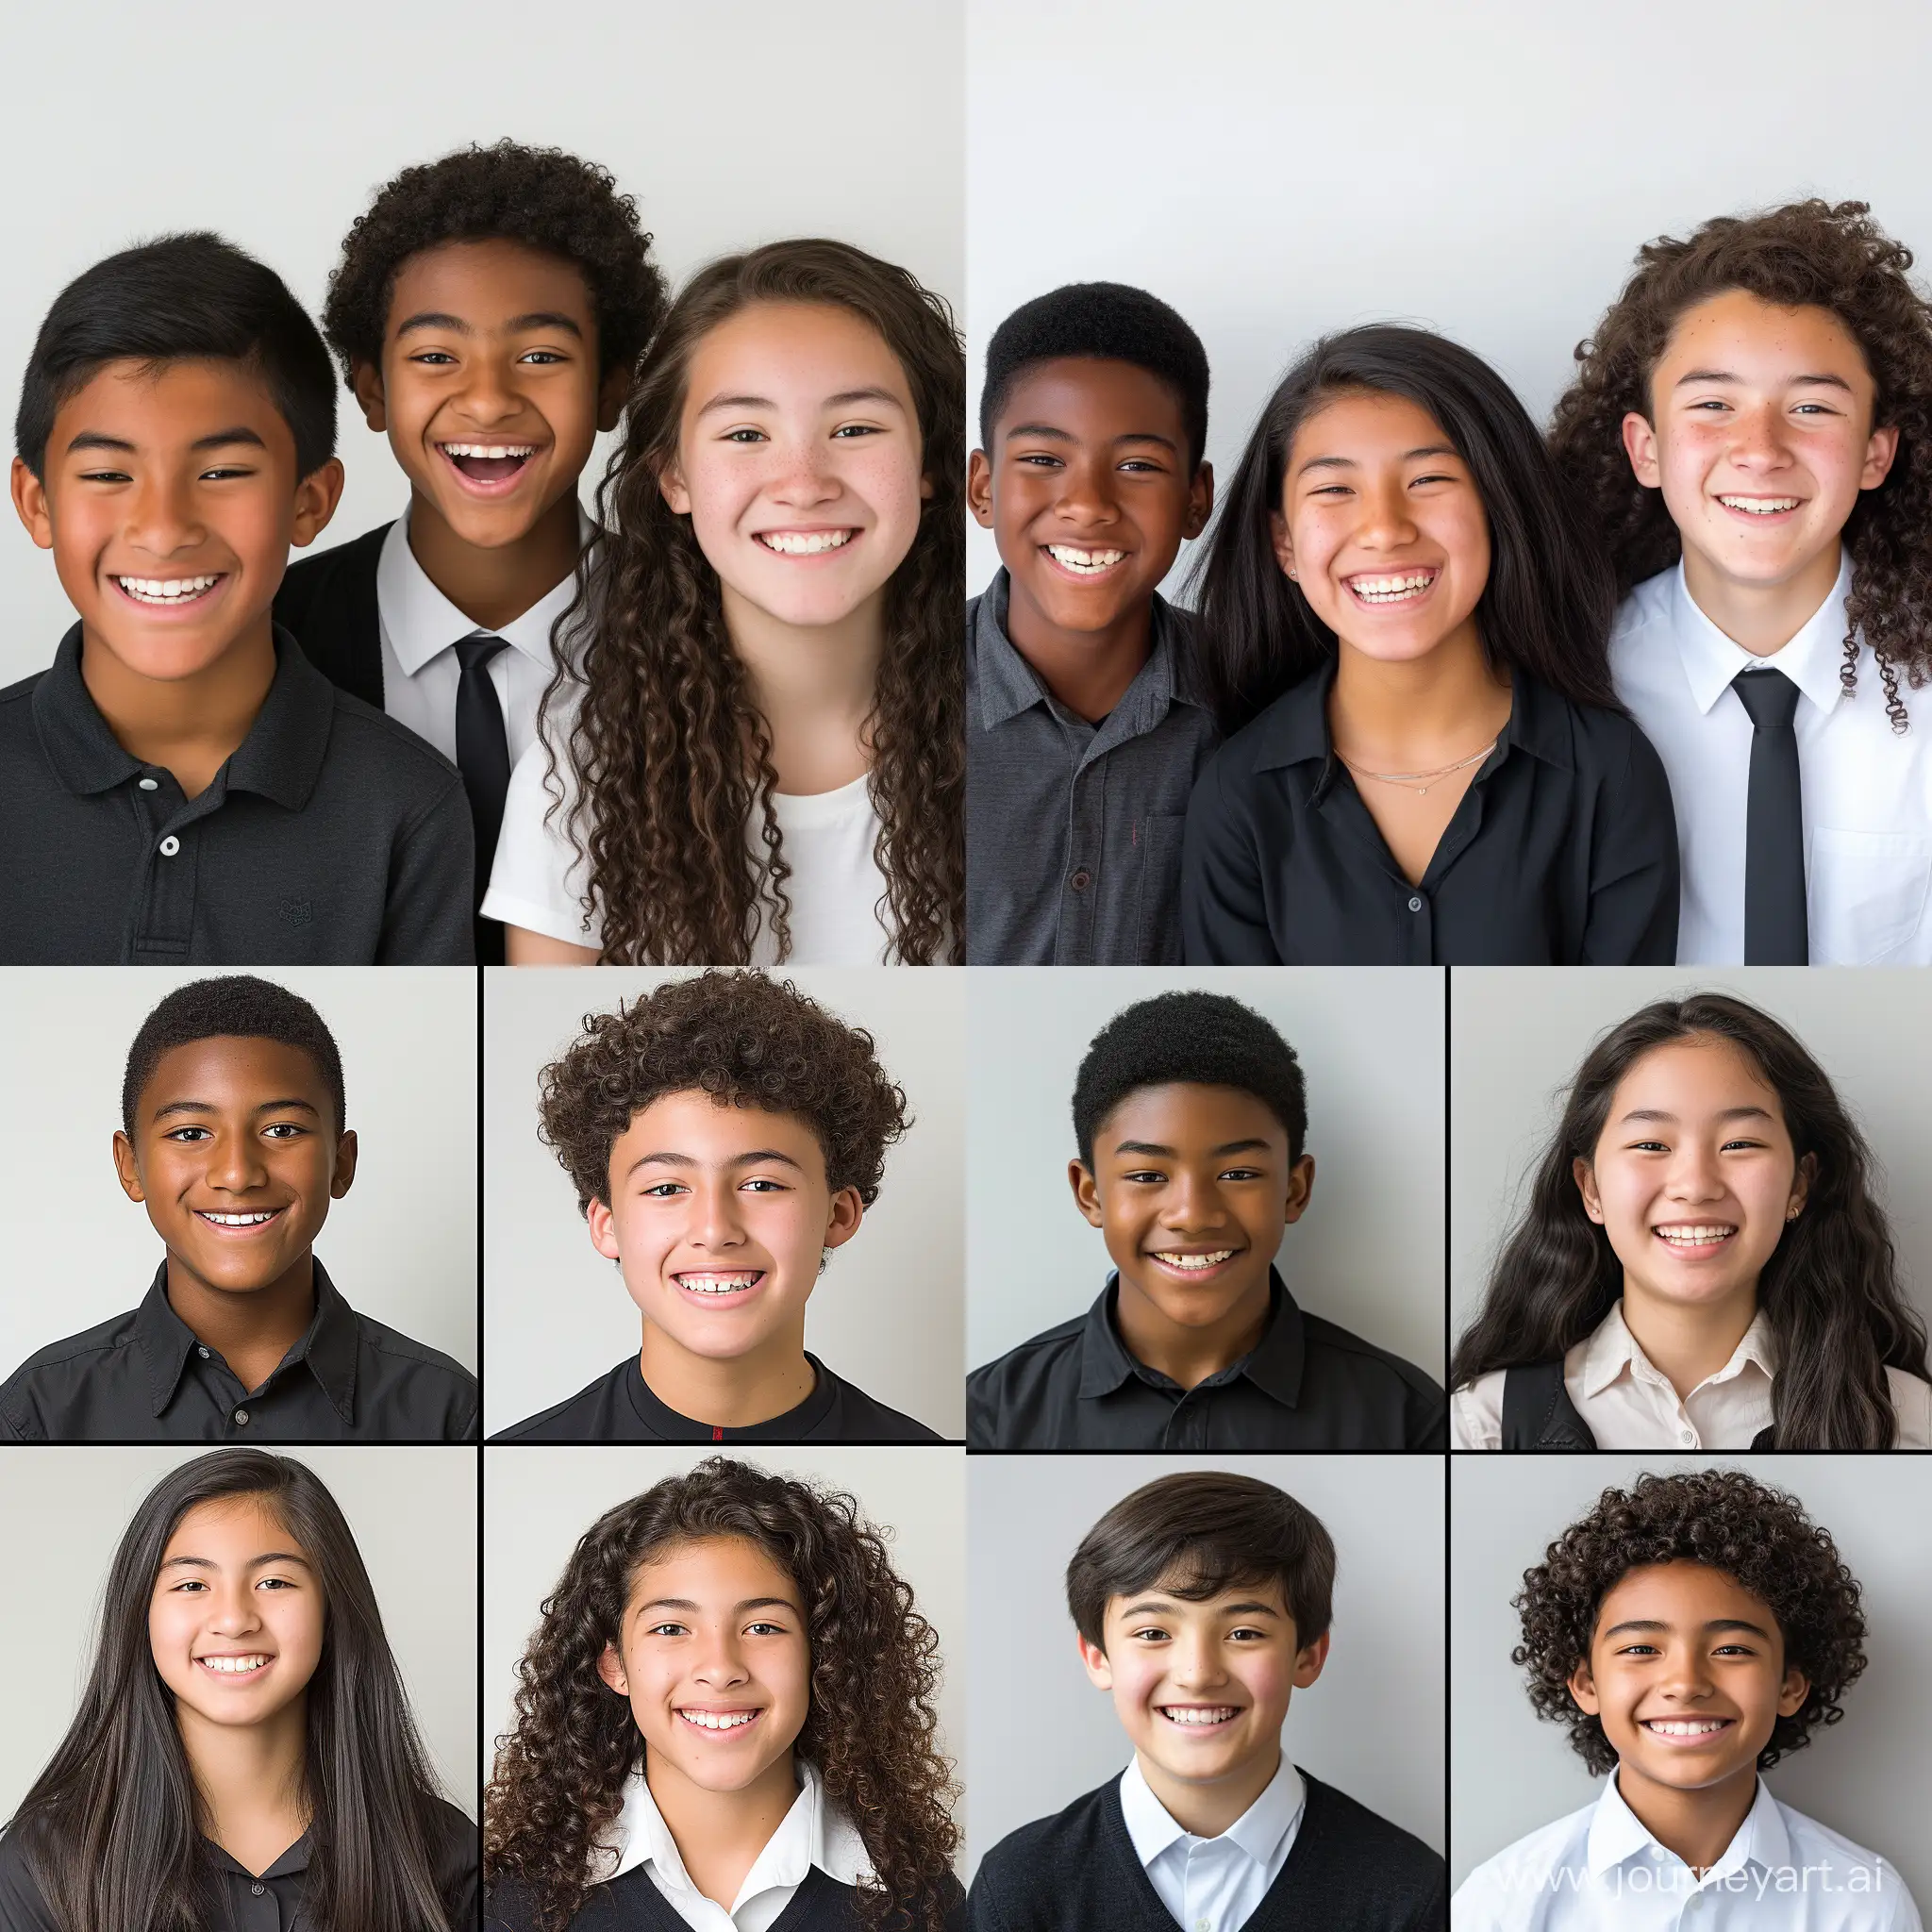 Diverse-Group-of-High-School-Students-Smiling-Together